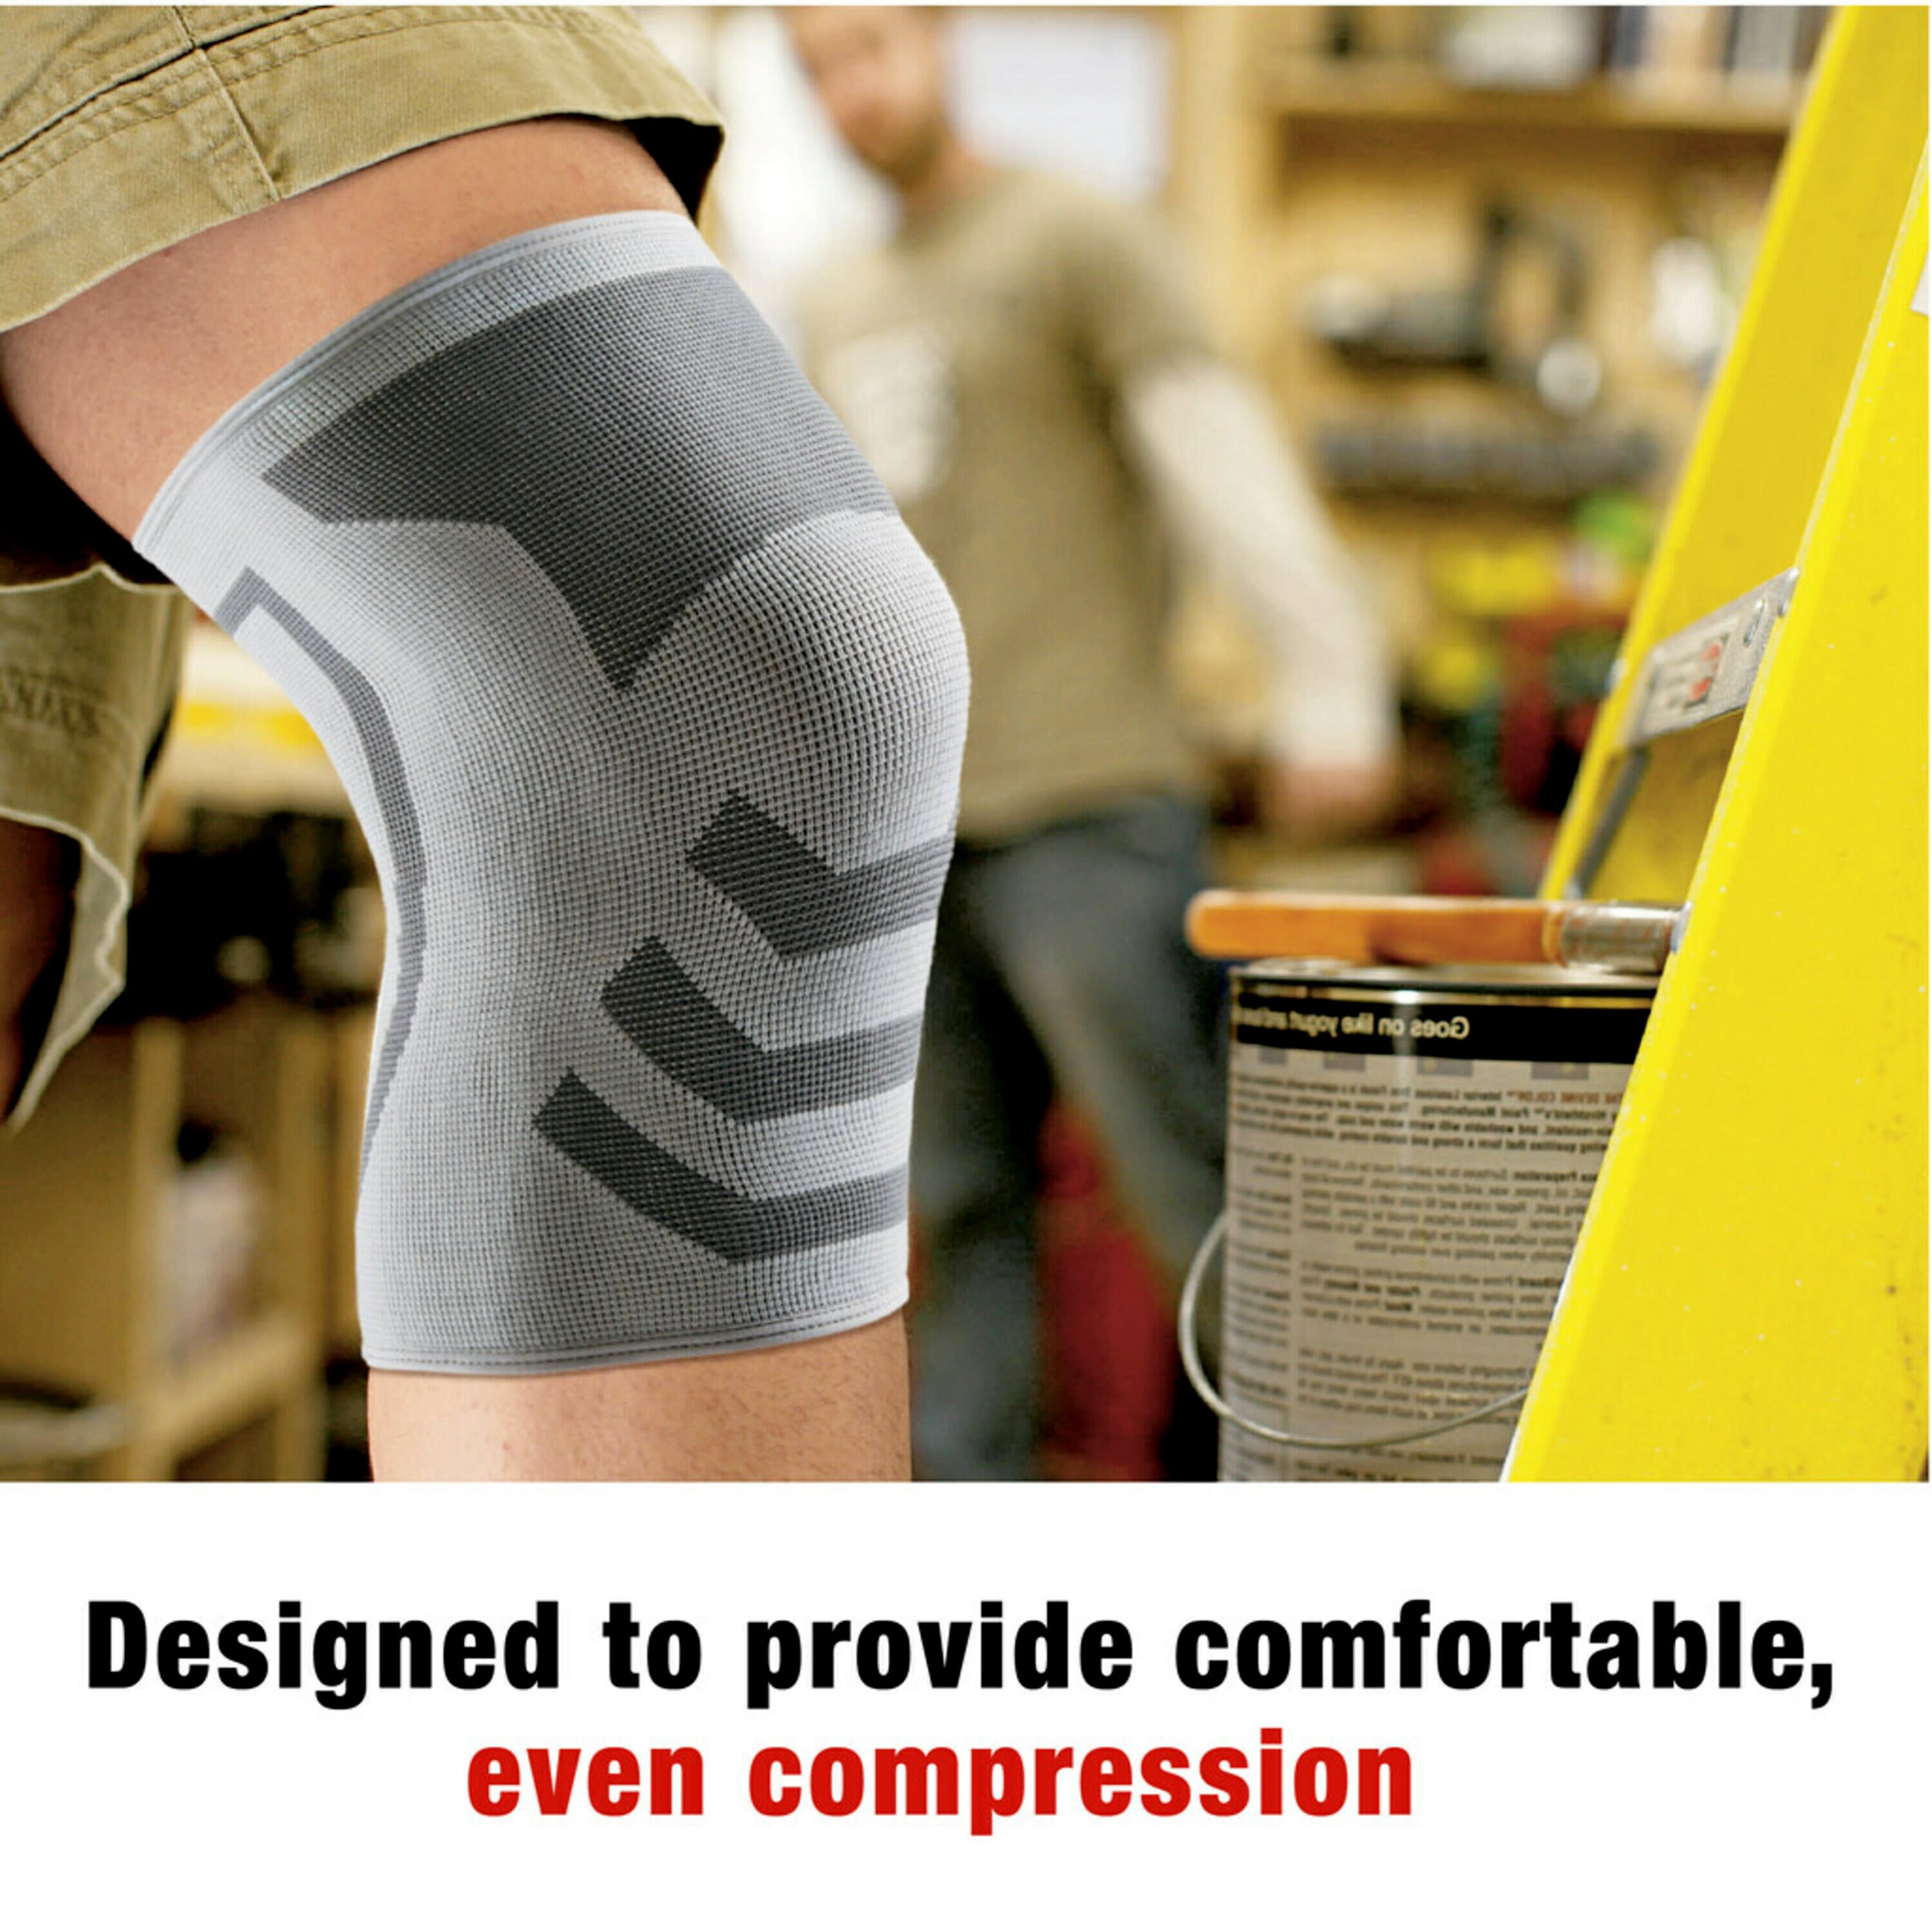 ACE Brand Compression Knee Support S/M, Comfortable Brace - image 3 of 16